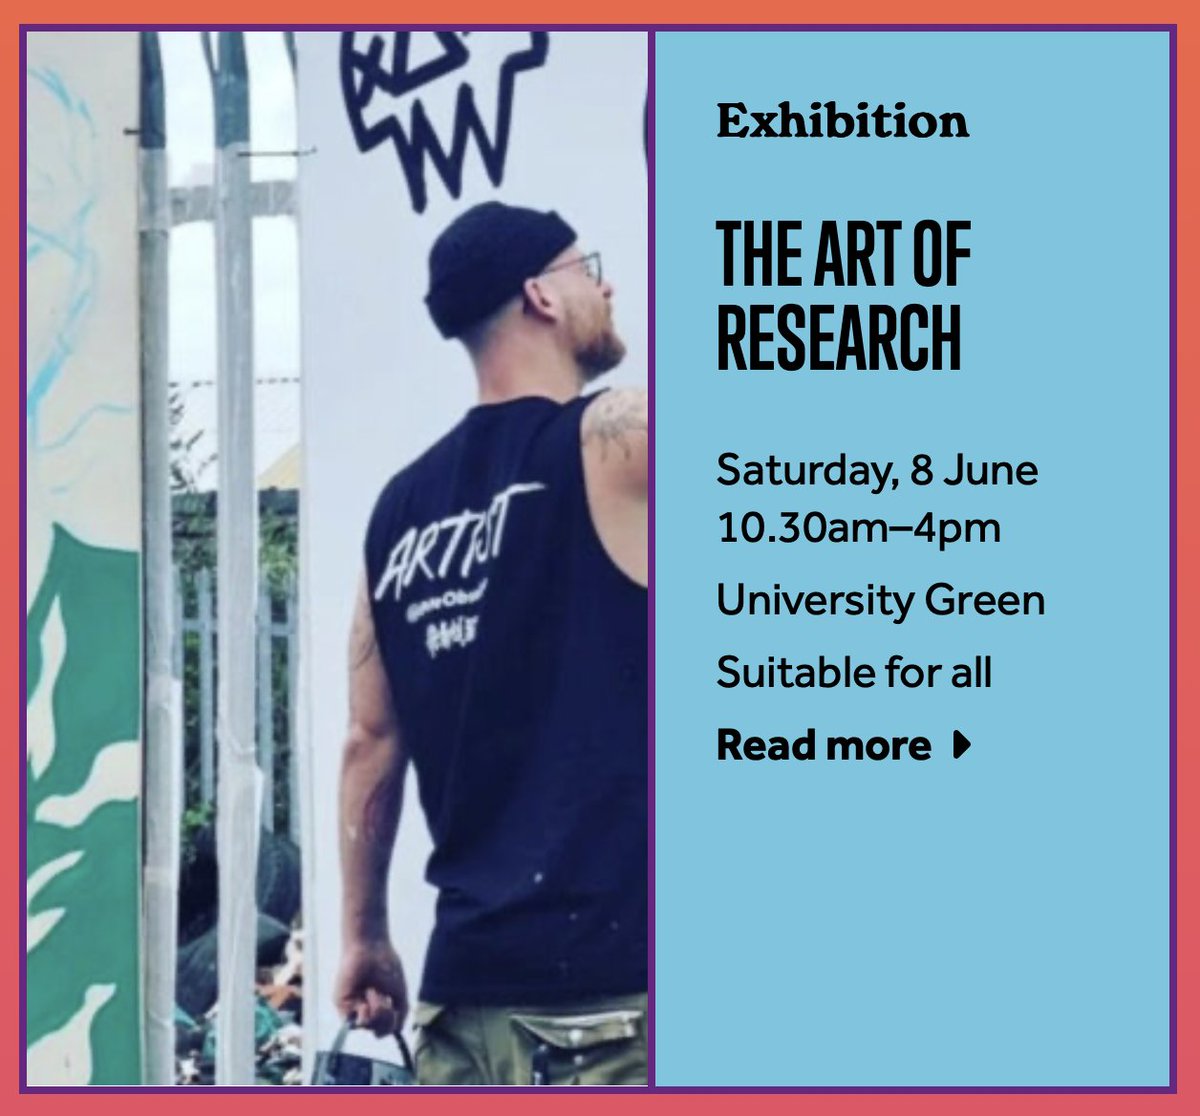 Come and see live street art expressing each of the four research platforms at @OfficialUoM to show #Manchester what our research is really about 🌏 Warm welcome for all to attend, get involved, ask questions - even the dog 🐶🎉 Find out more here 👉bit.ly/3V3lMpc